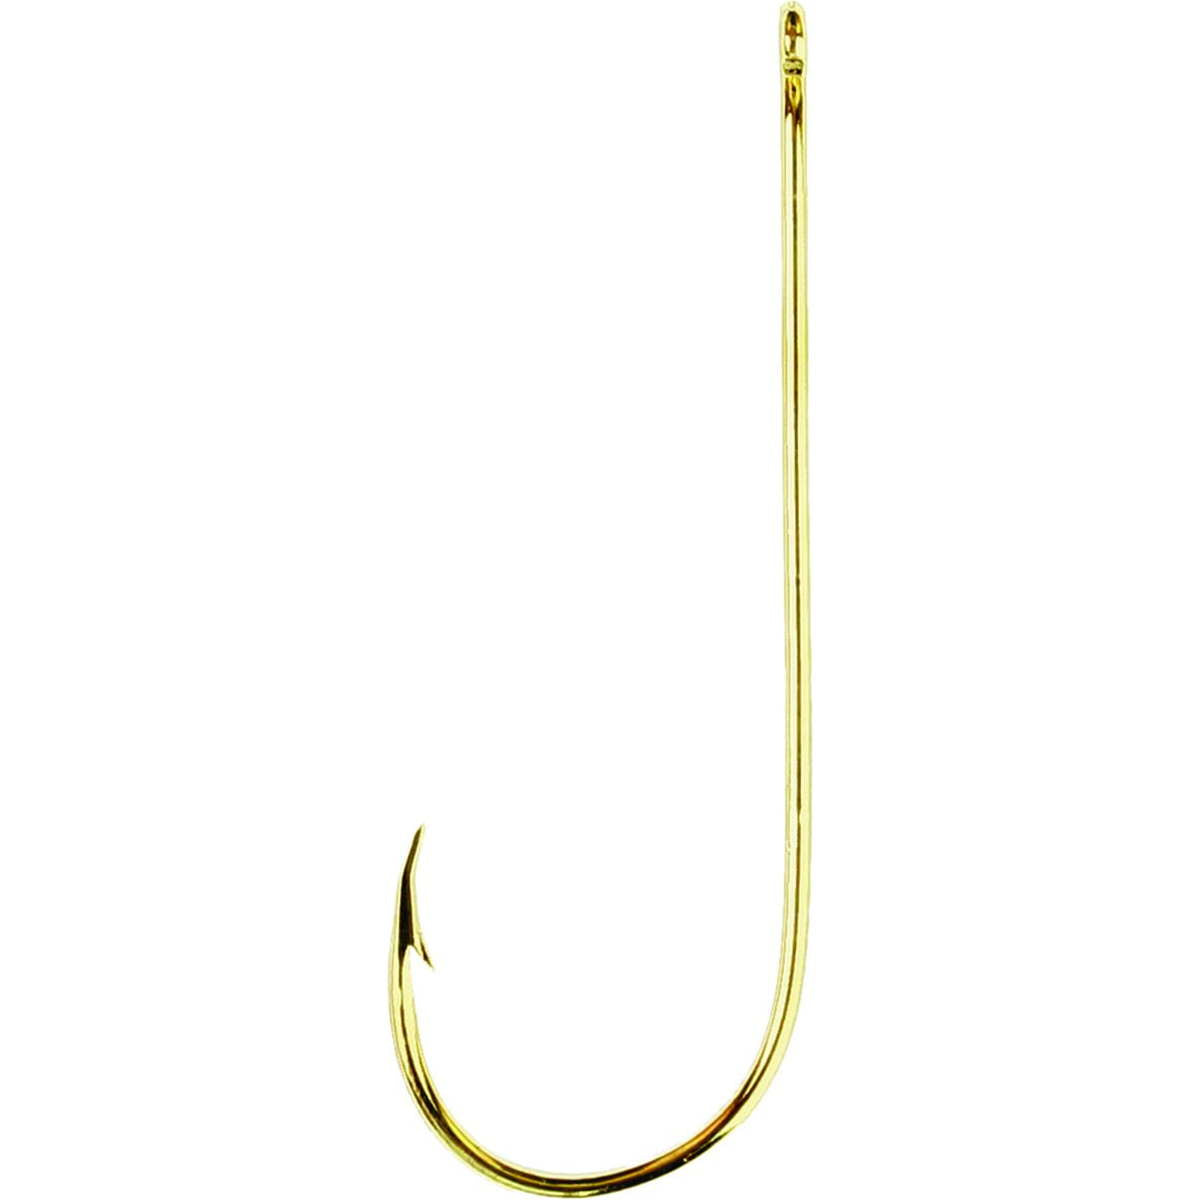 Photo of Eagle Claw Aberdeen Light Wire Hook for sale at United Tackle Shops.